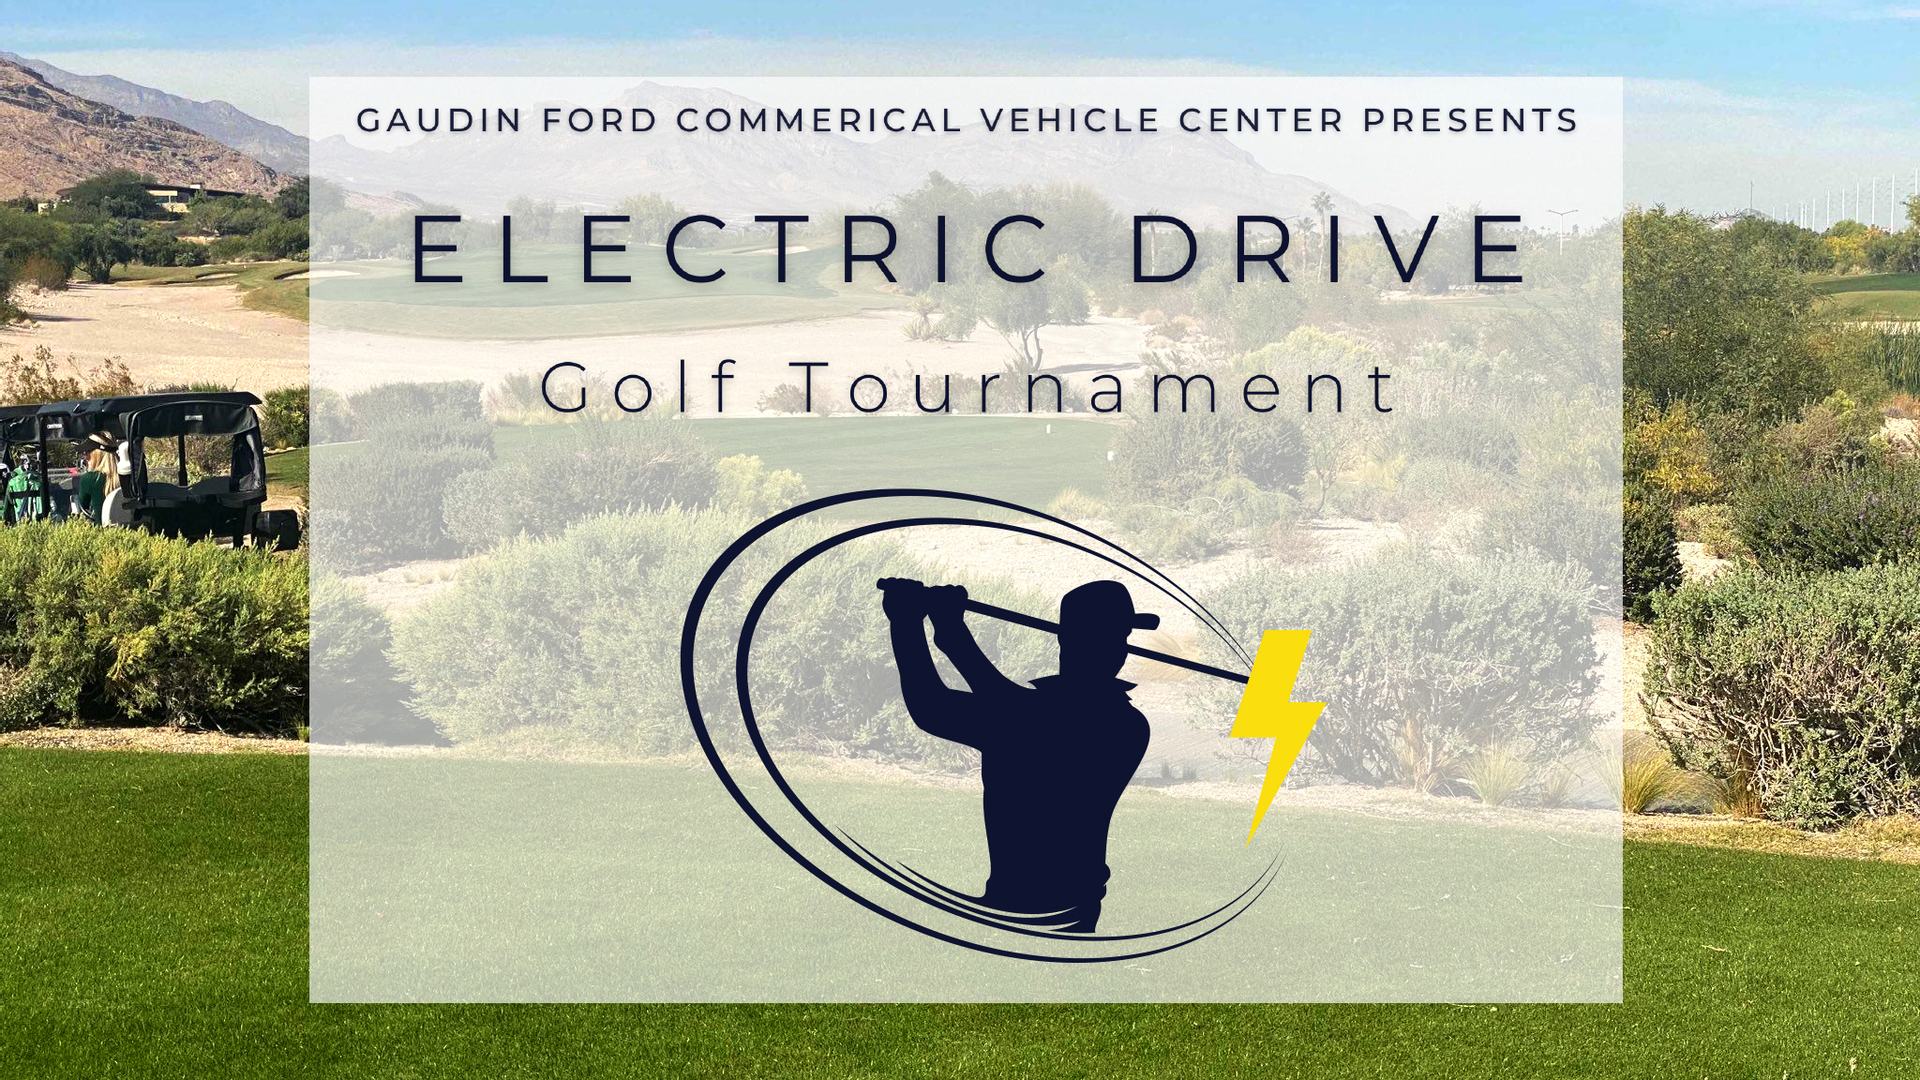 Hytiva®, Shelby®, and Tommy Cars® Sponsor The Electric Drive Golf Tournament with Gaudin Ford at Bear's Best